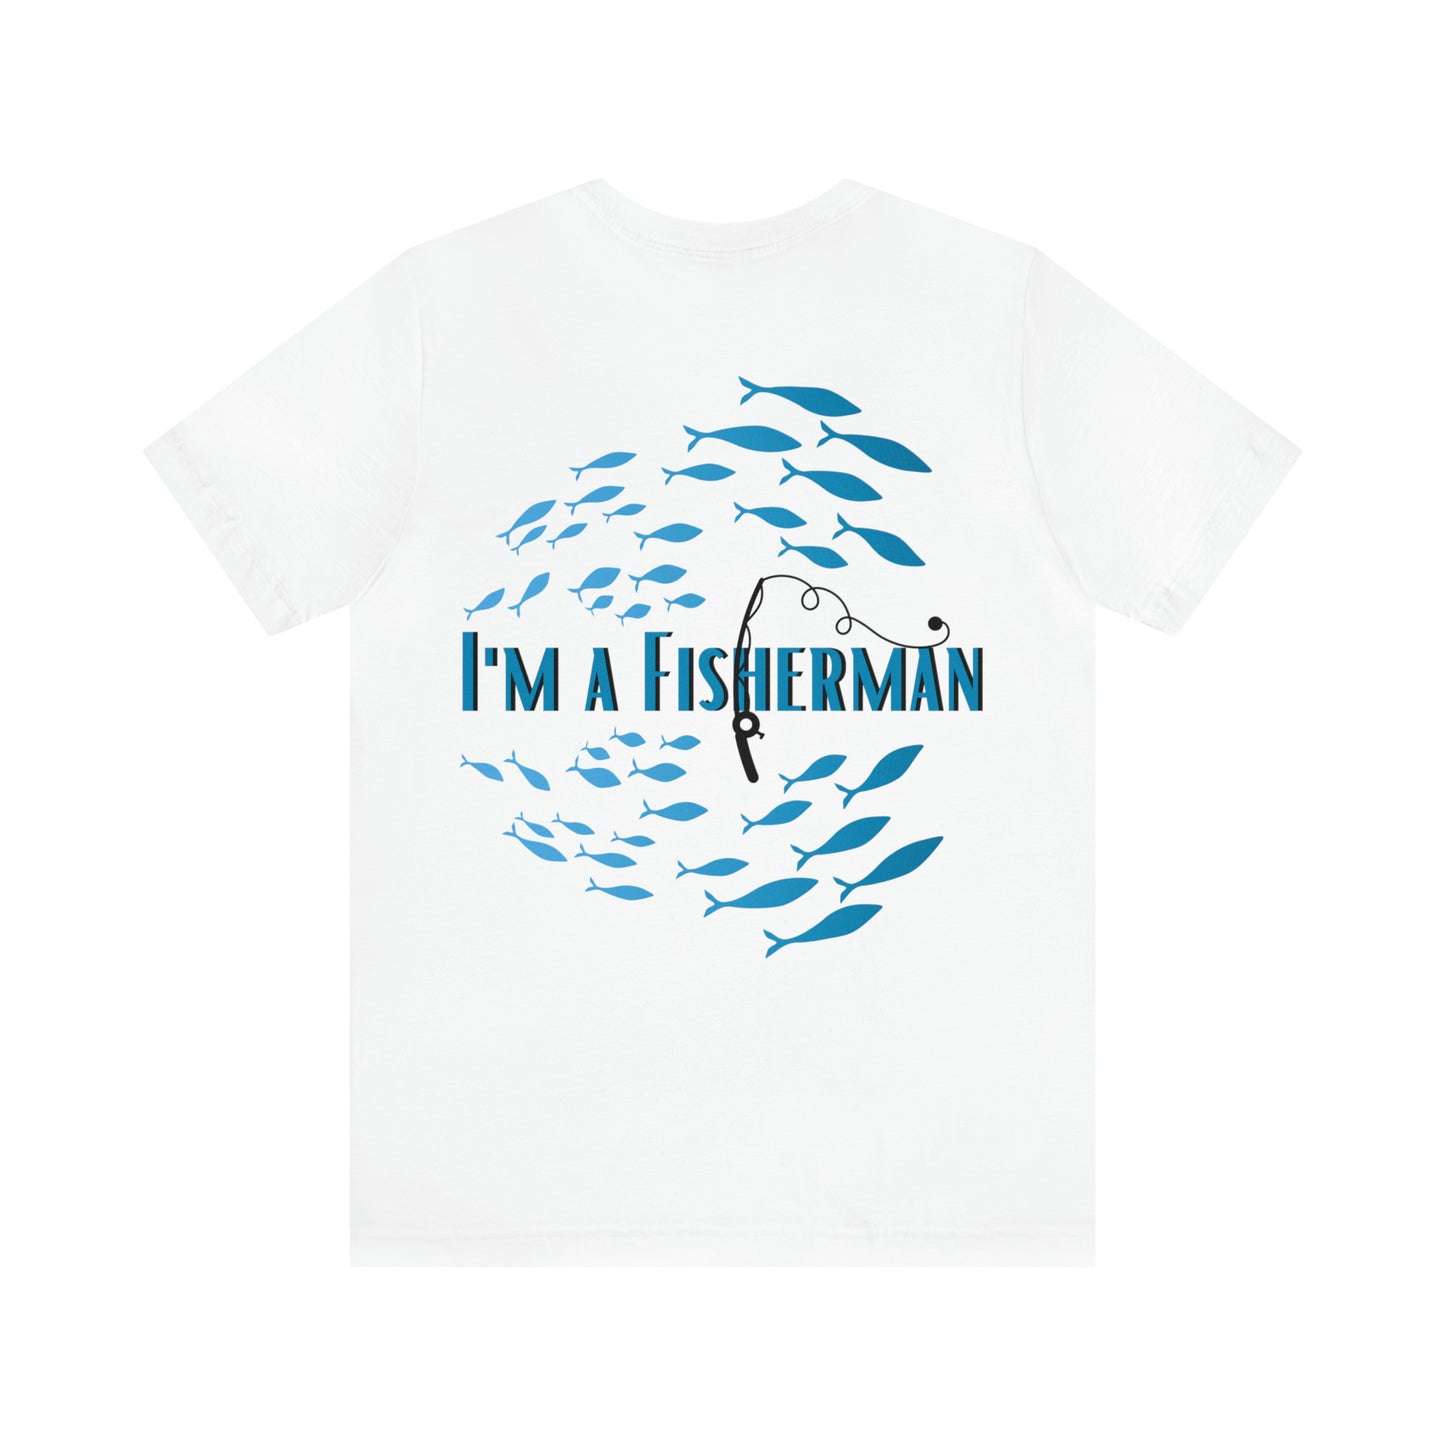 Father's Day Fishermen T-Shirt, Minister that loves to fish